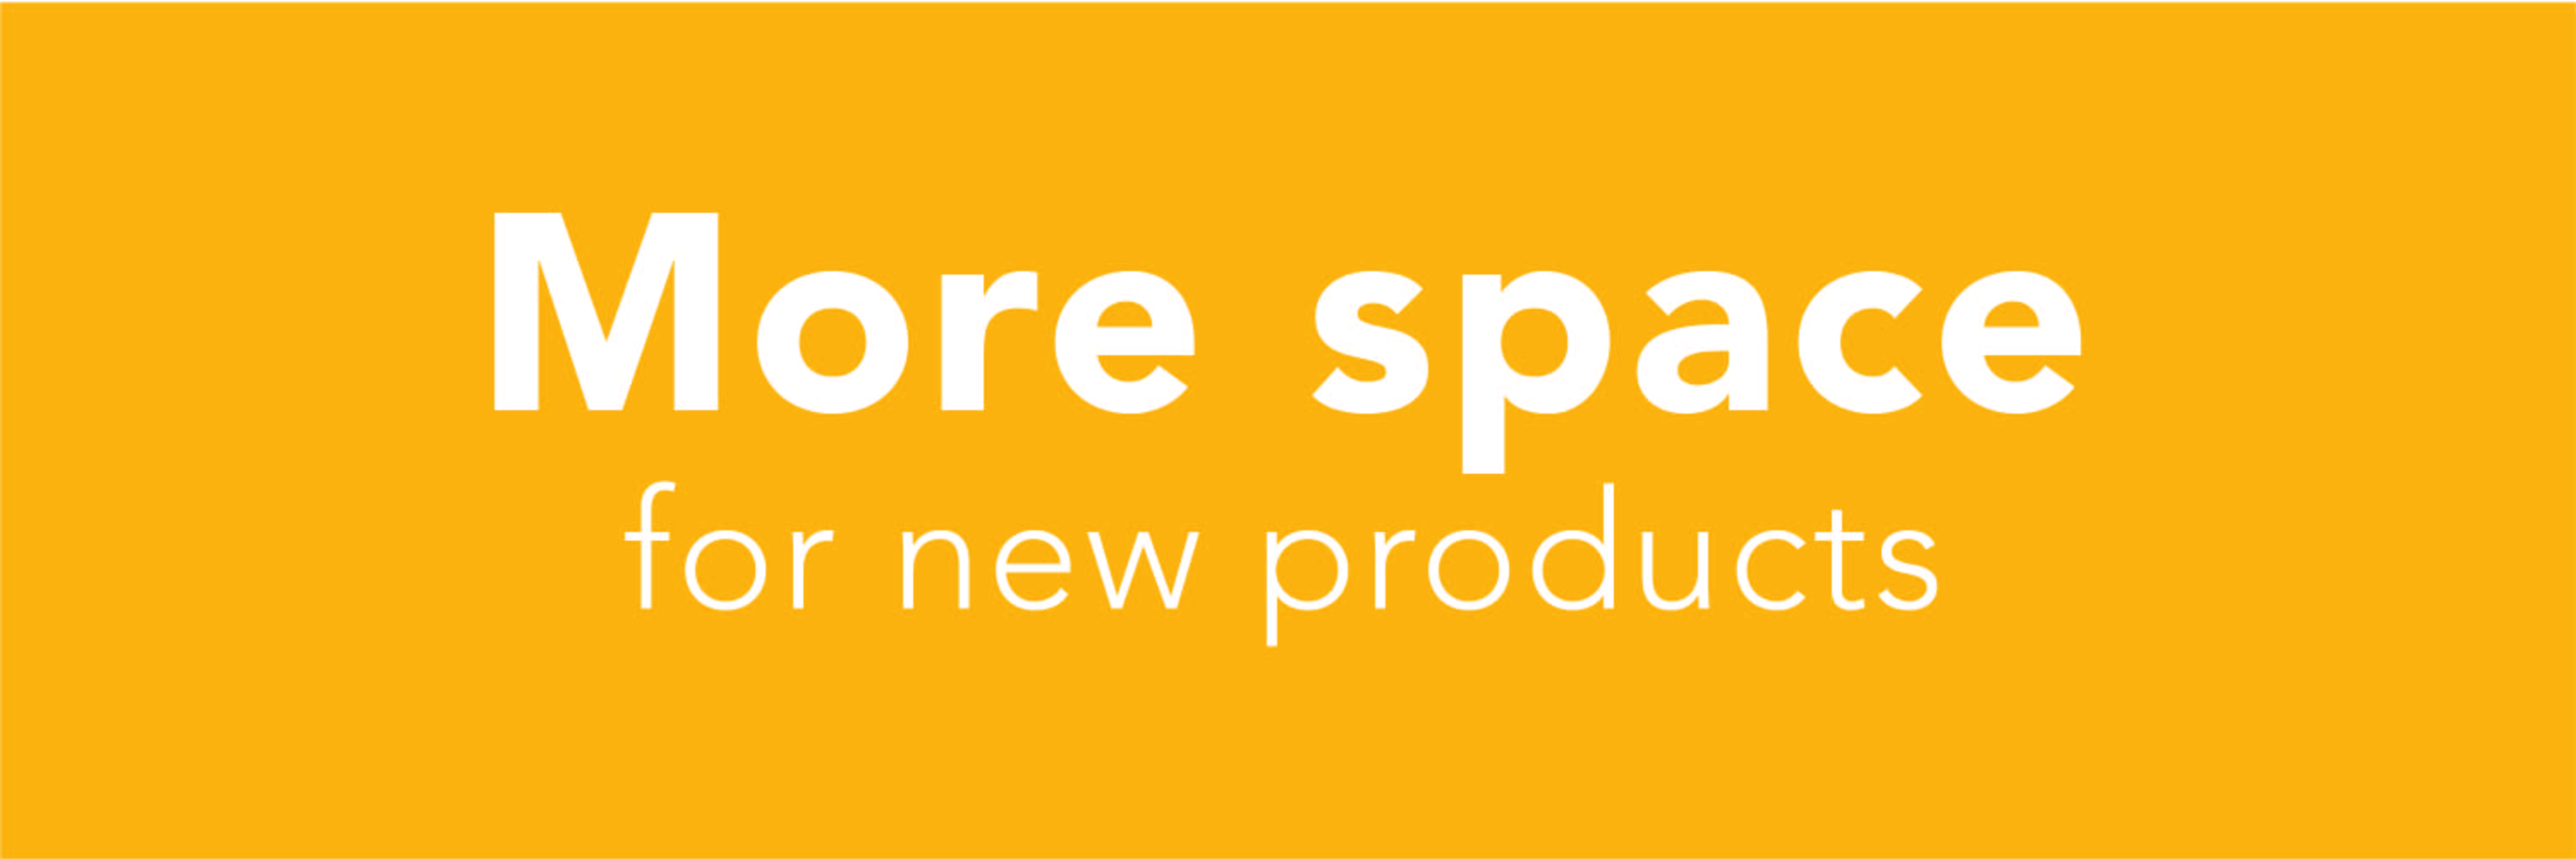 More space for new products